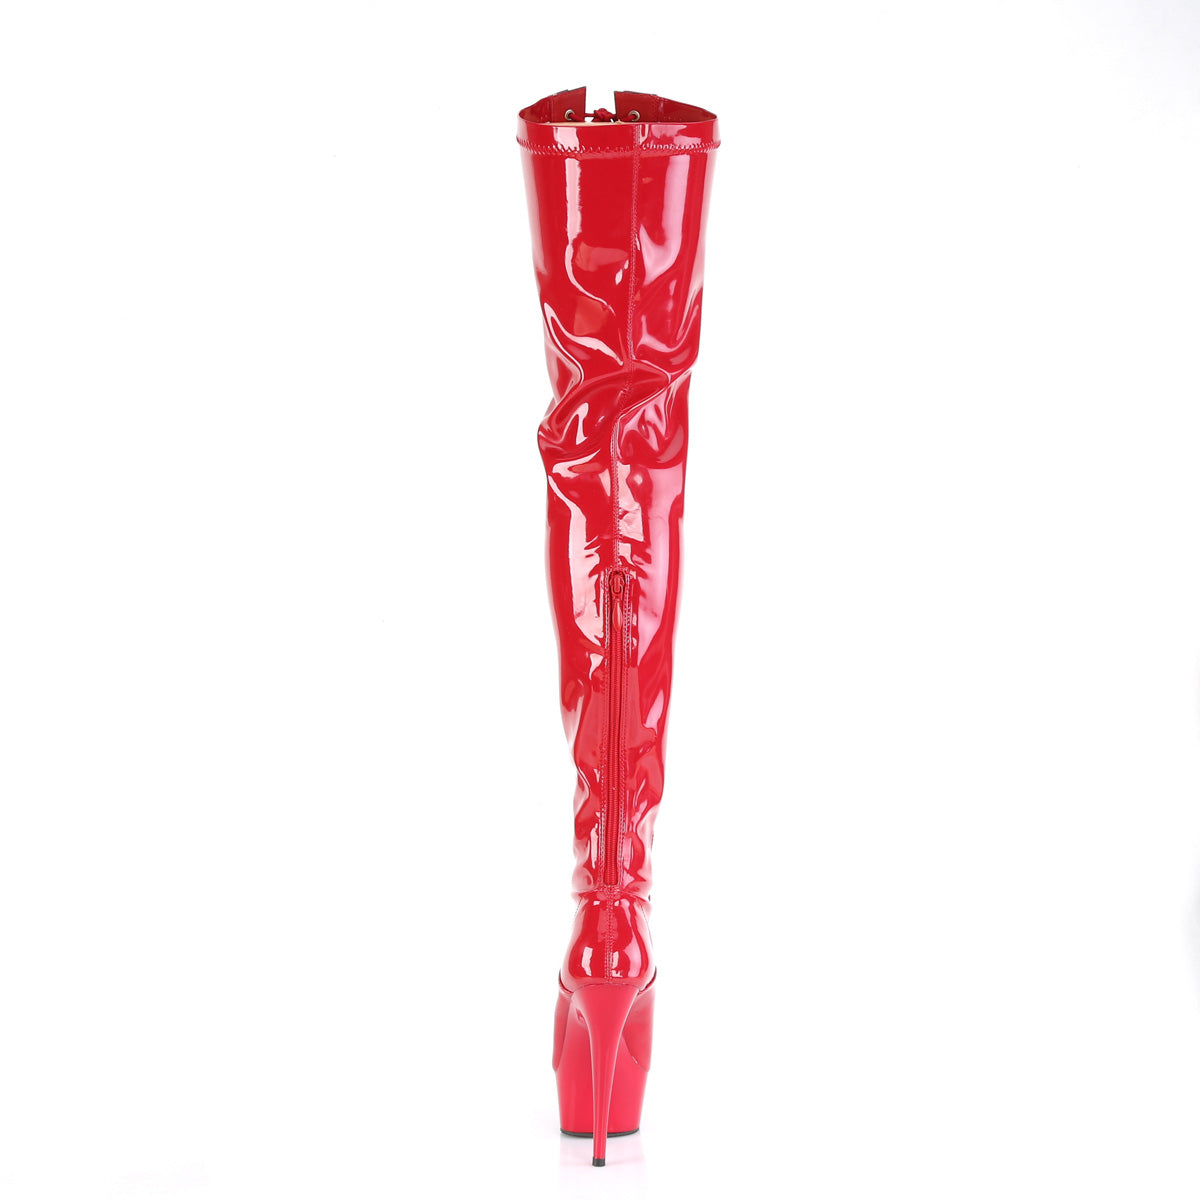 DELIGHT-3027 Pleaser Thigh High Boots Red-Black Str. Pat/Red Platforms (Exotic Dancing)